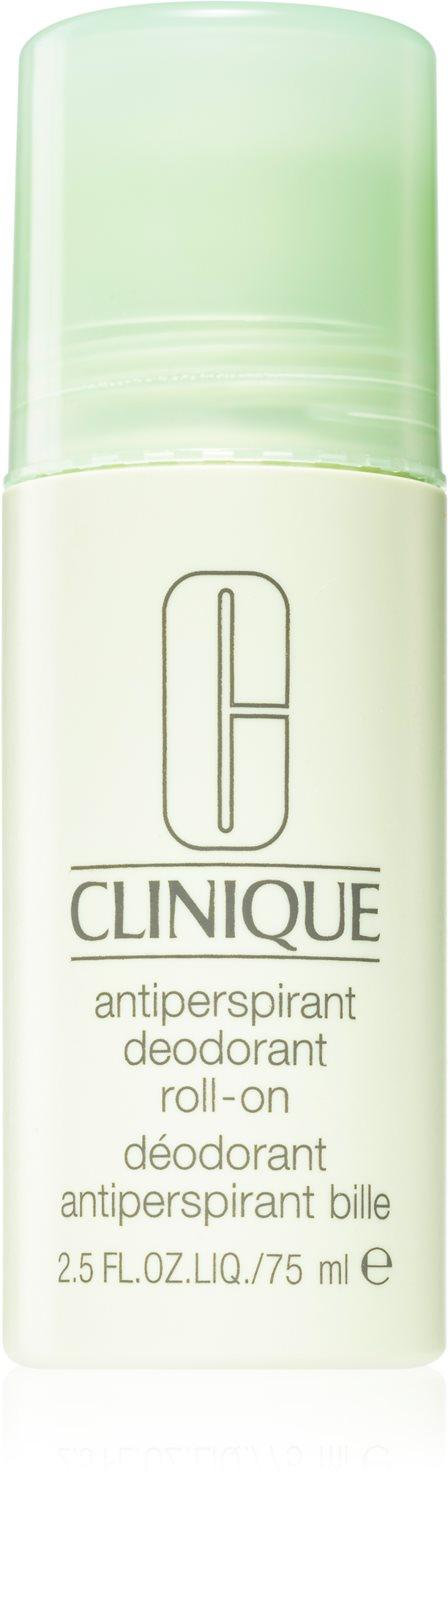 Clinique Antiperspirant-Deodorant Roll-on Roll-On - Perfume Oasis